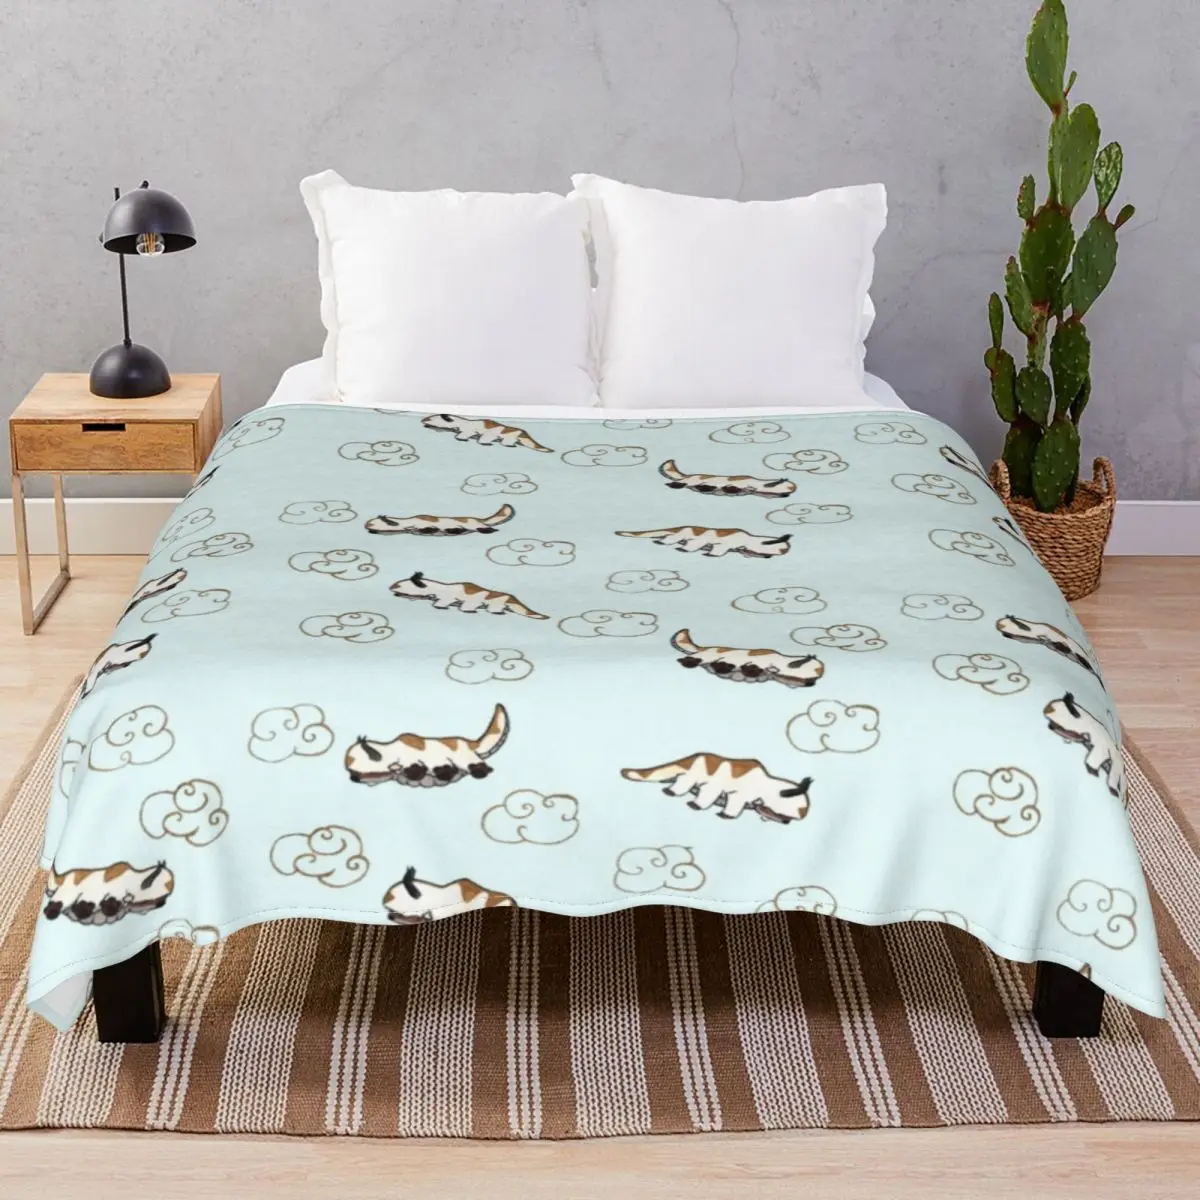 Happy Appa Blankets Flannel Summer Soft Unisex Throw Blanket for Bedding Sofa Travel Office